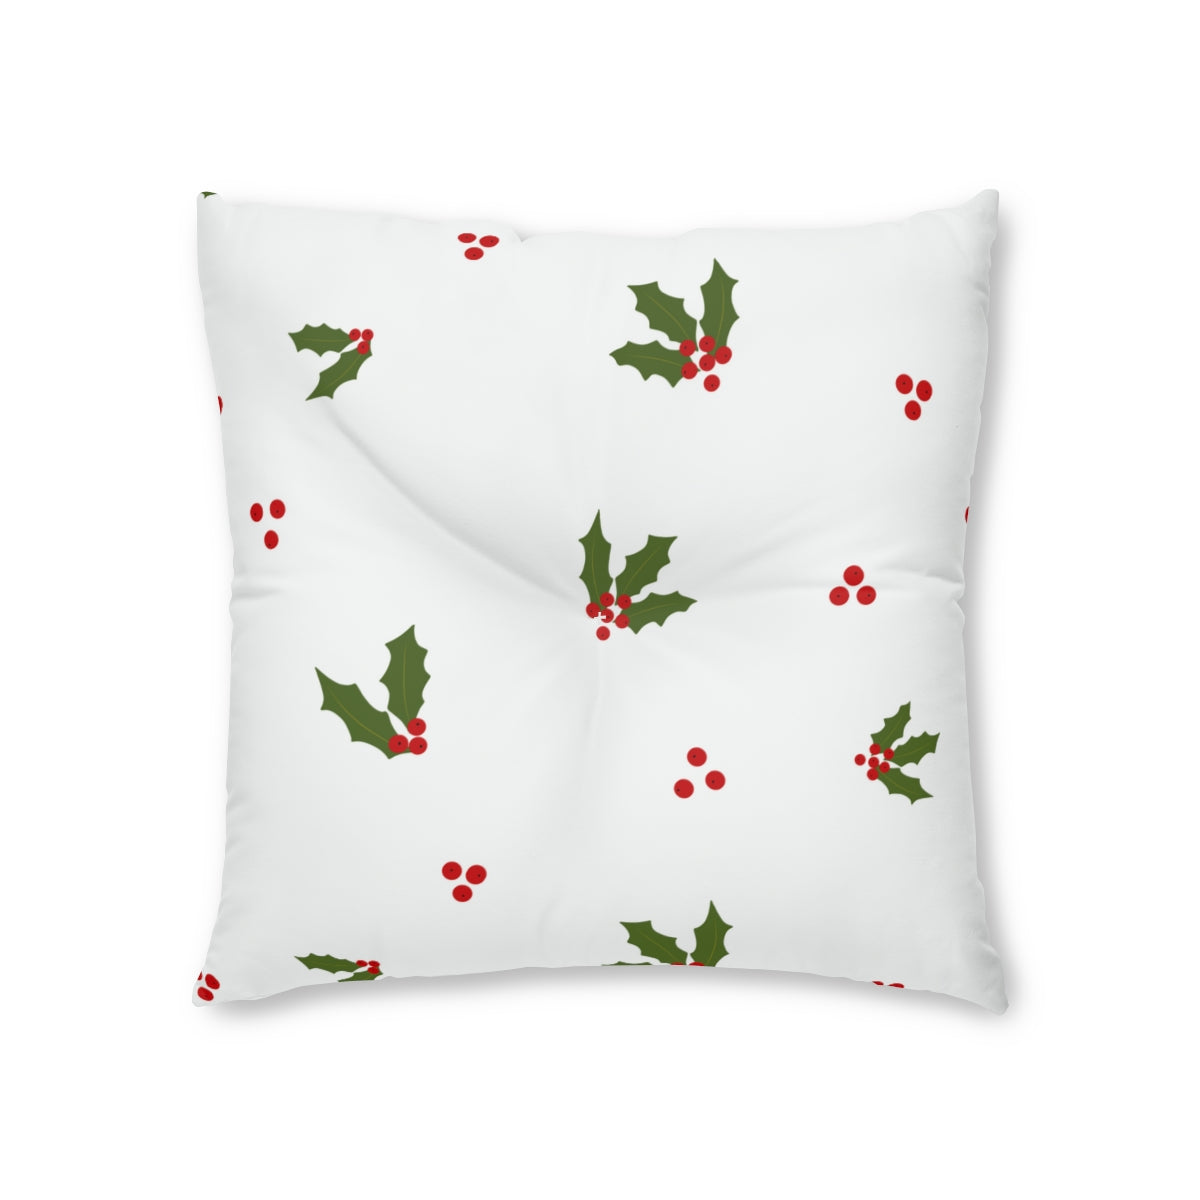 Lifestyle Details - White Square Tufted Holiday Floor Pillow - Red & Green Holly - 26x26 - Front View